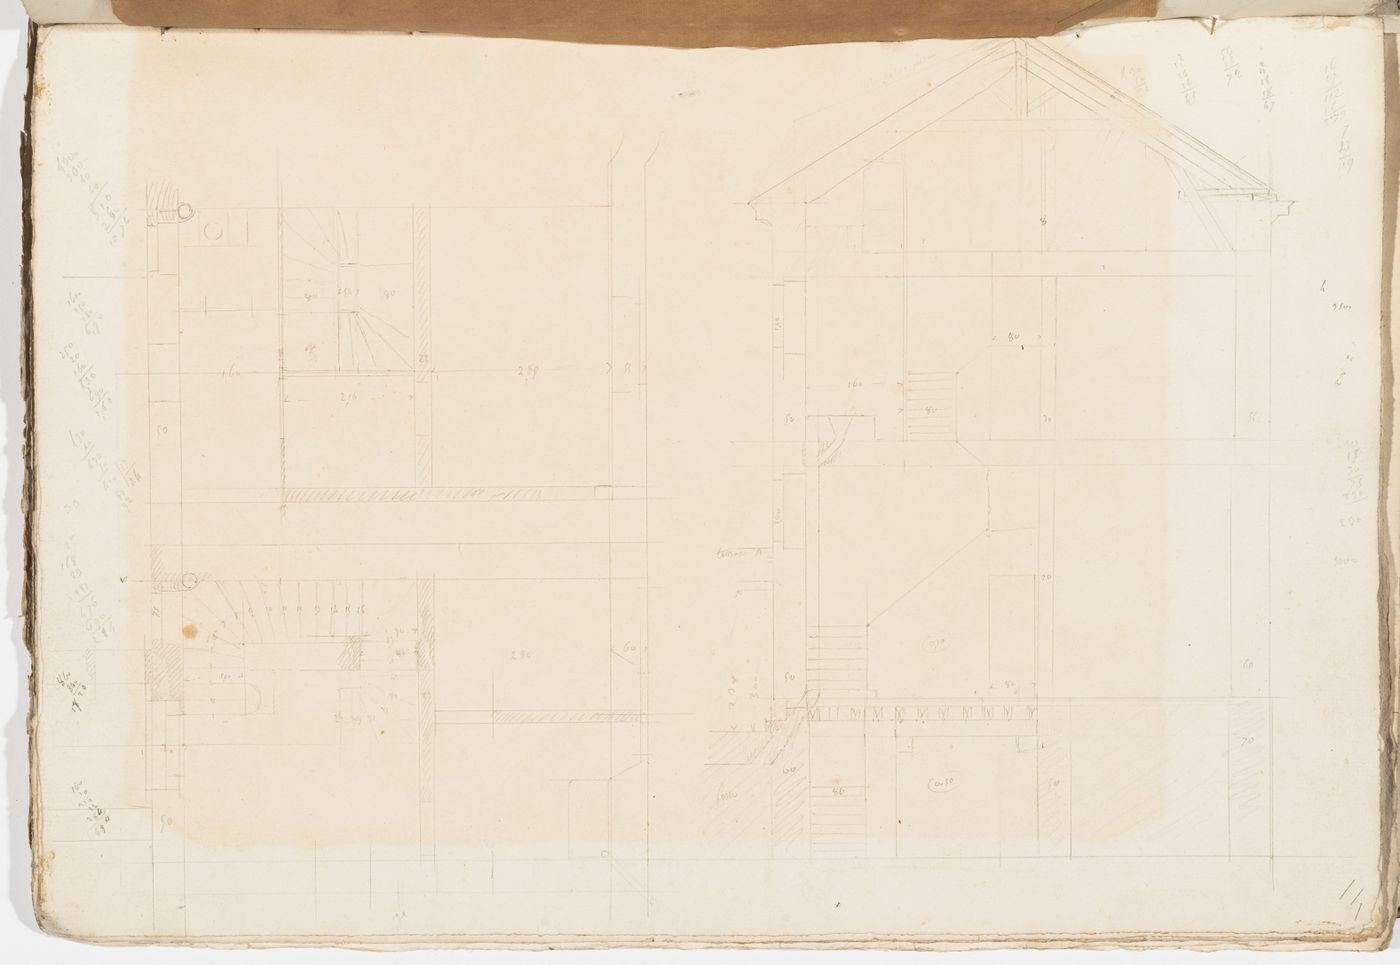 Project no. 9 for a country house for comte Treilhard: Cross section and partial plan showing the stairs